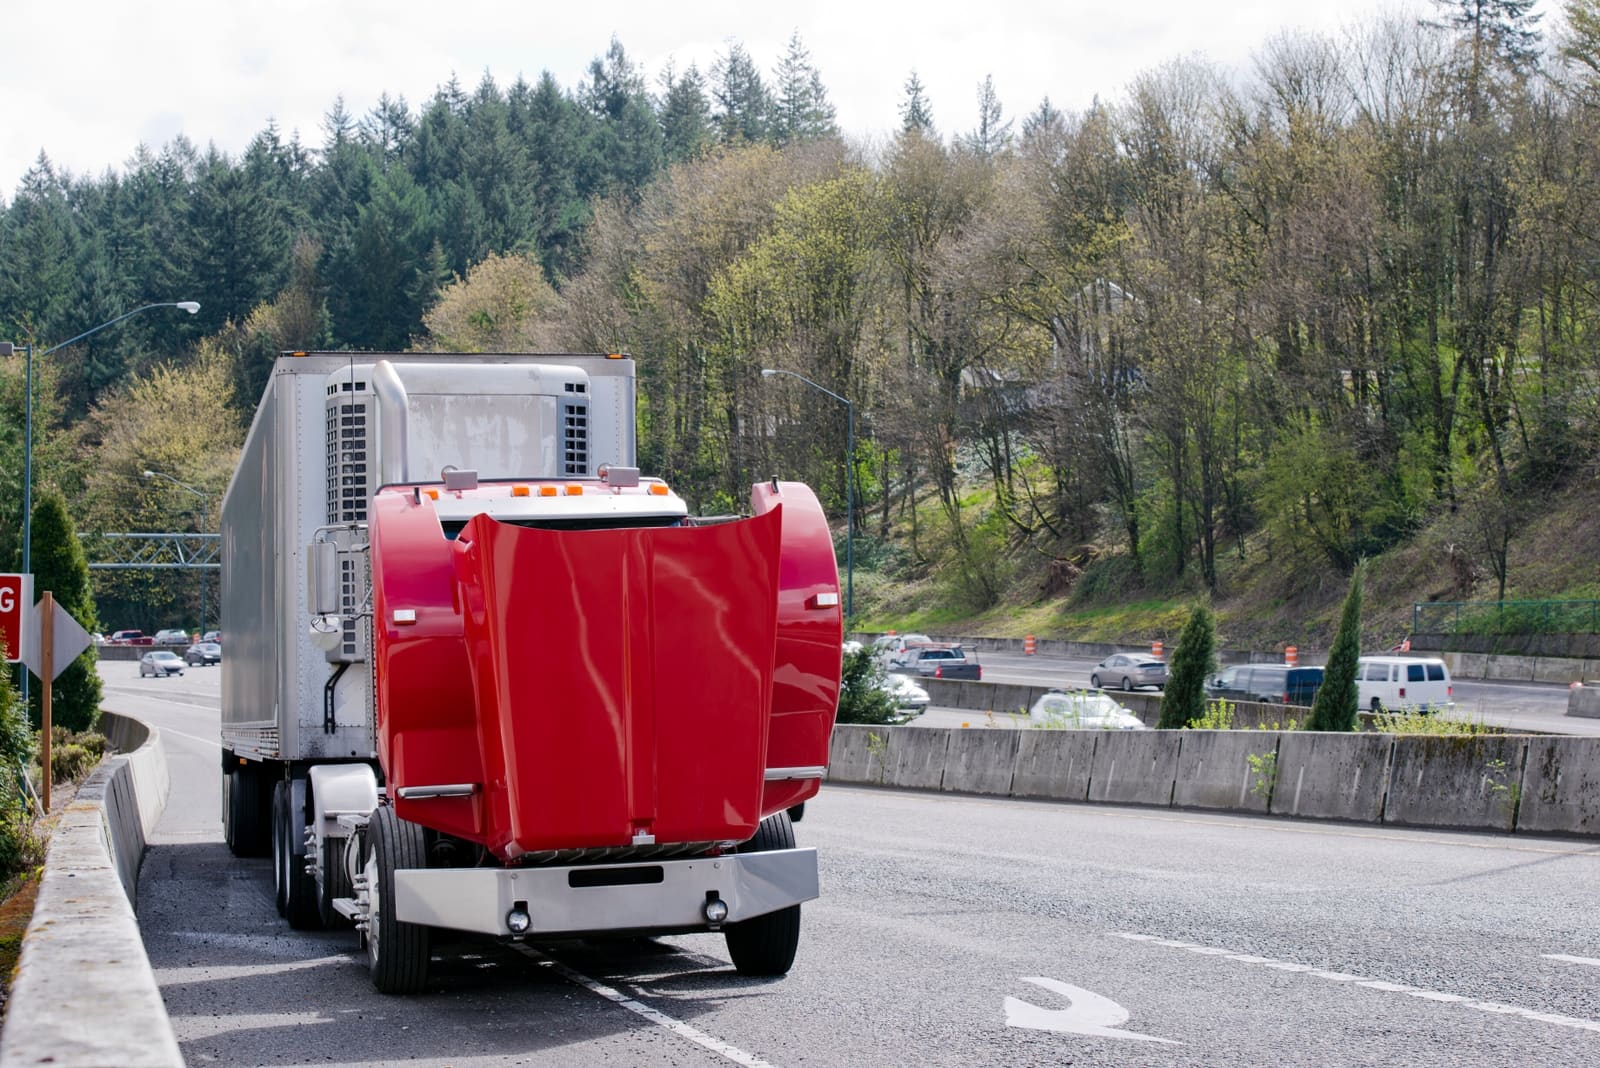 An image of a large freight truck parked alongside a roadway. The hood of the truck is open and ready to be inspected by a technician. The truck is red and pulling a silver trailer. In the backgroundd, cards blur as motorists drive by at a rapid pace.